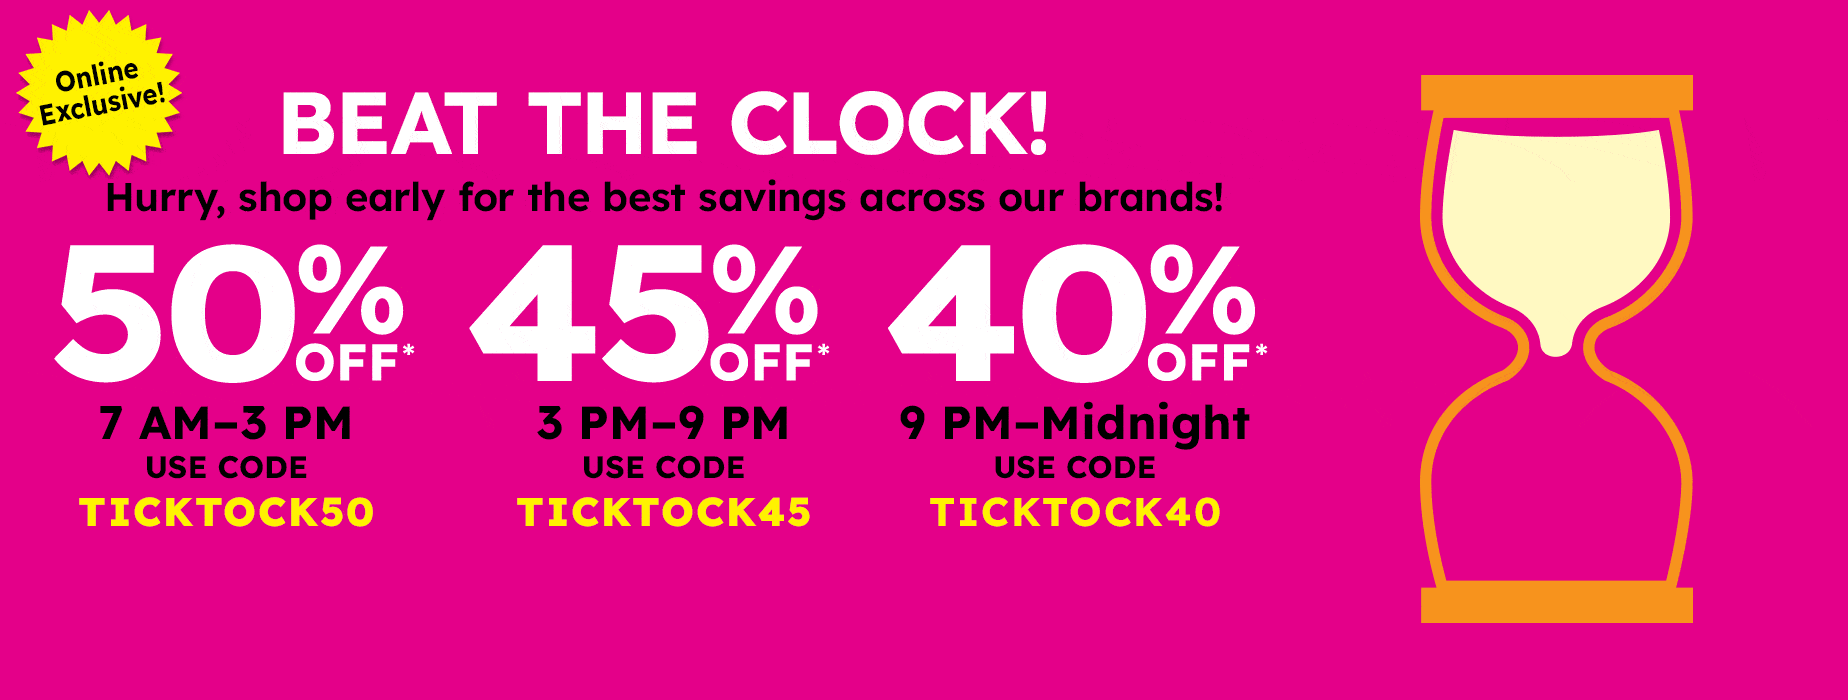 Beat the clock! Hurry, shop early for the best savings across our brands Act Fast